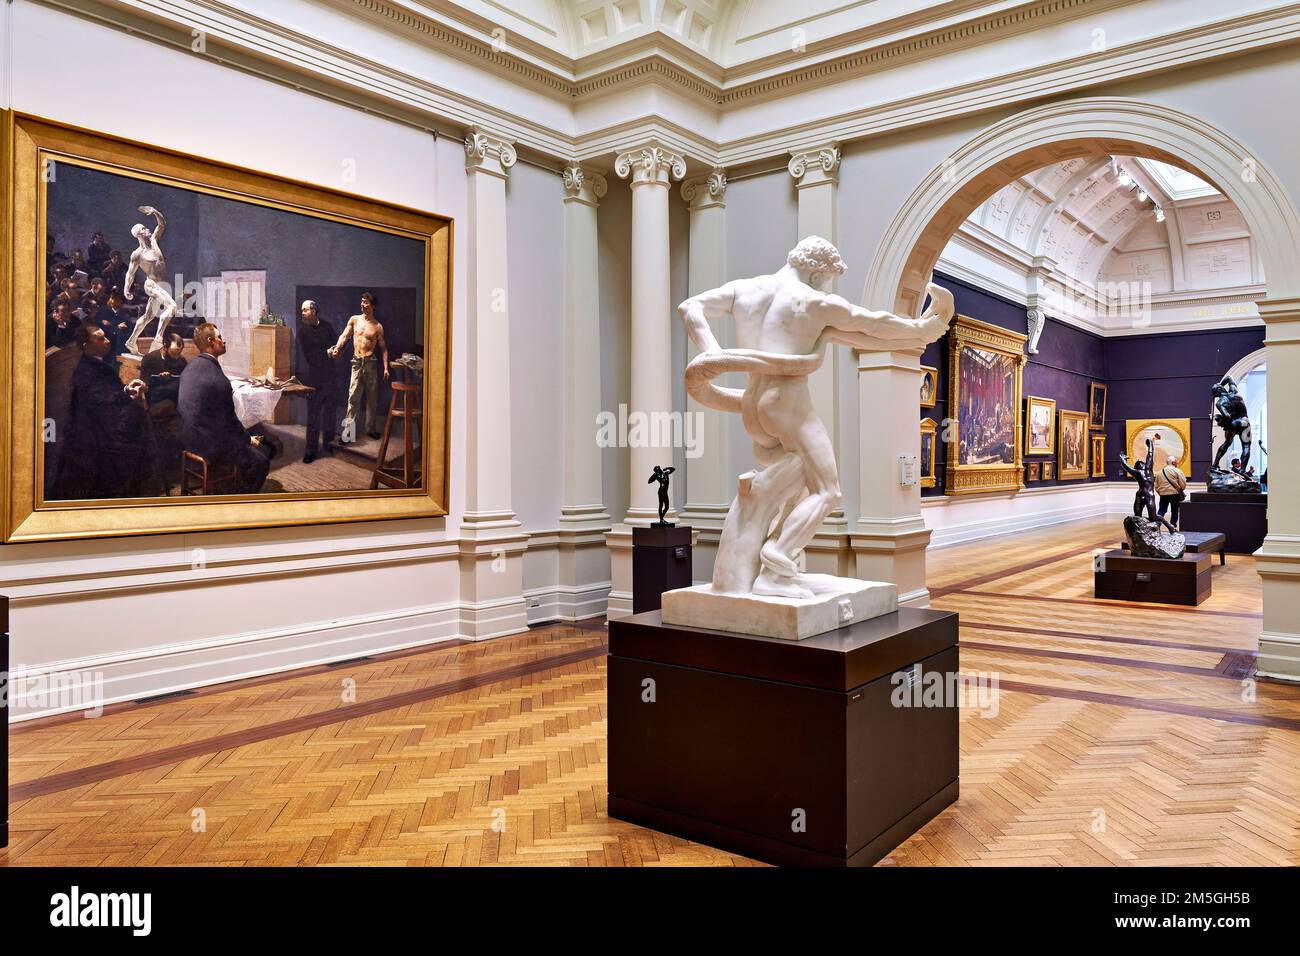 Sydney. New South Wales. Australia. The Art Gallery of NSW. The John Schaeffer Galleries Stock Photo